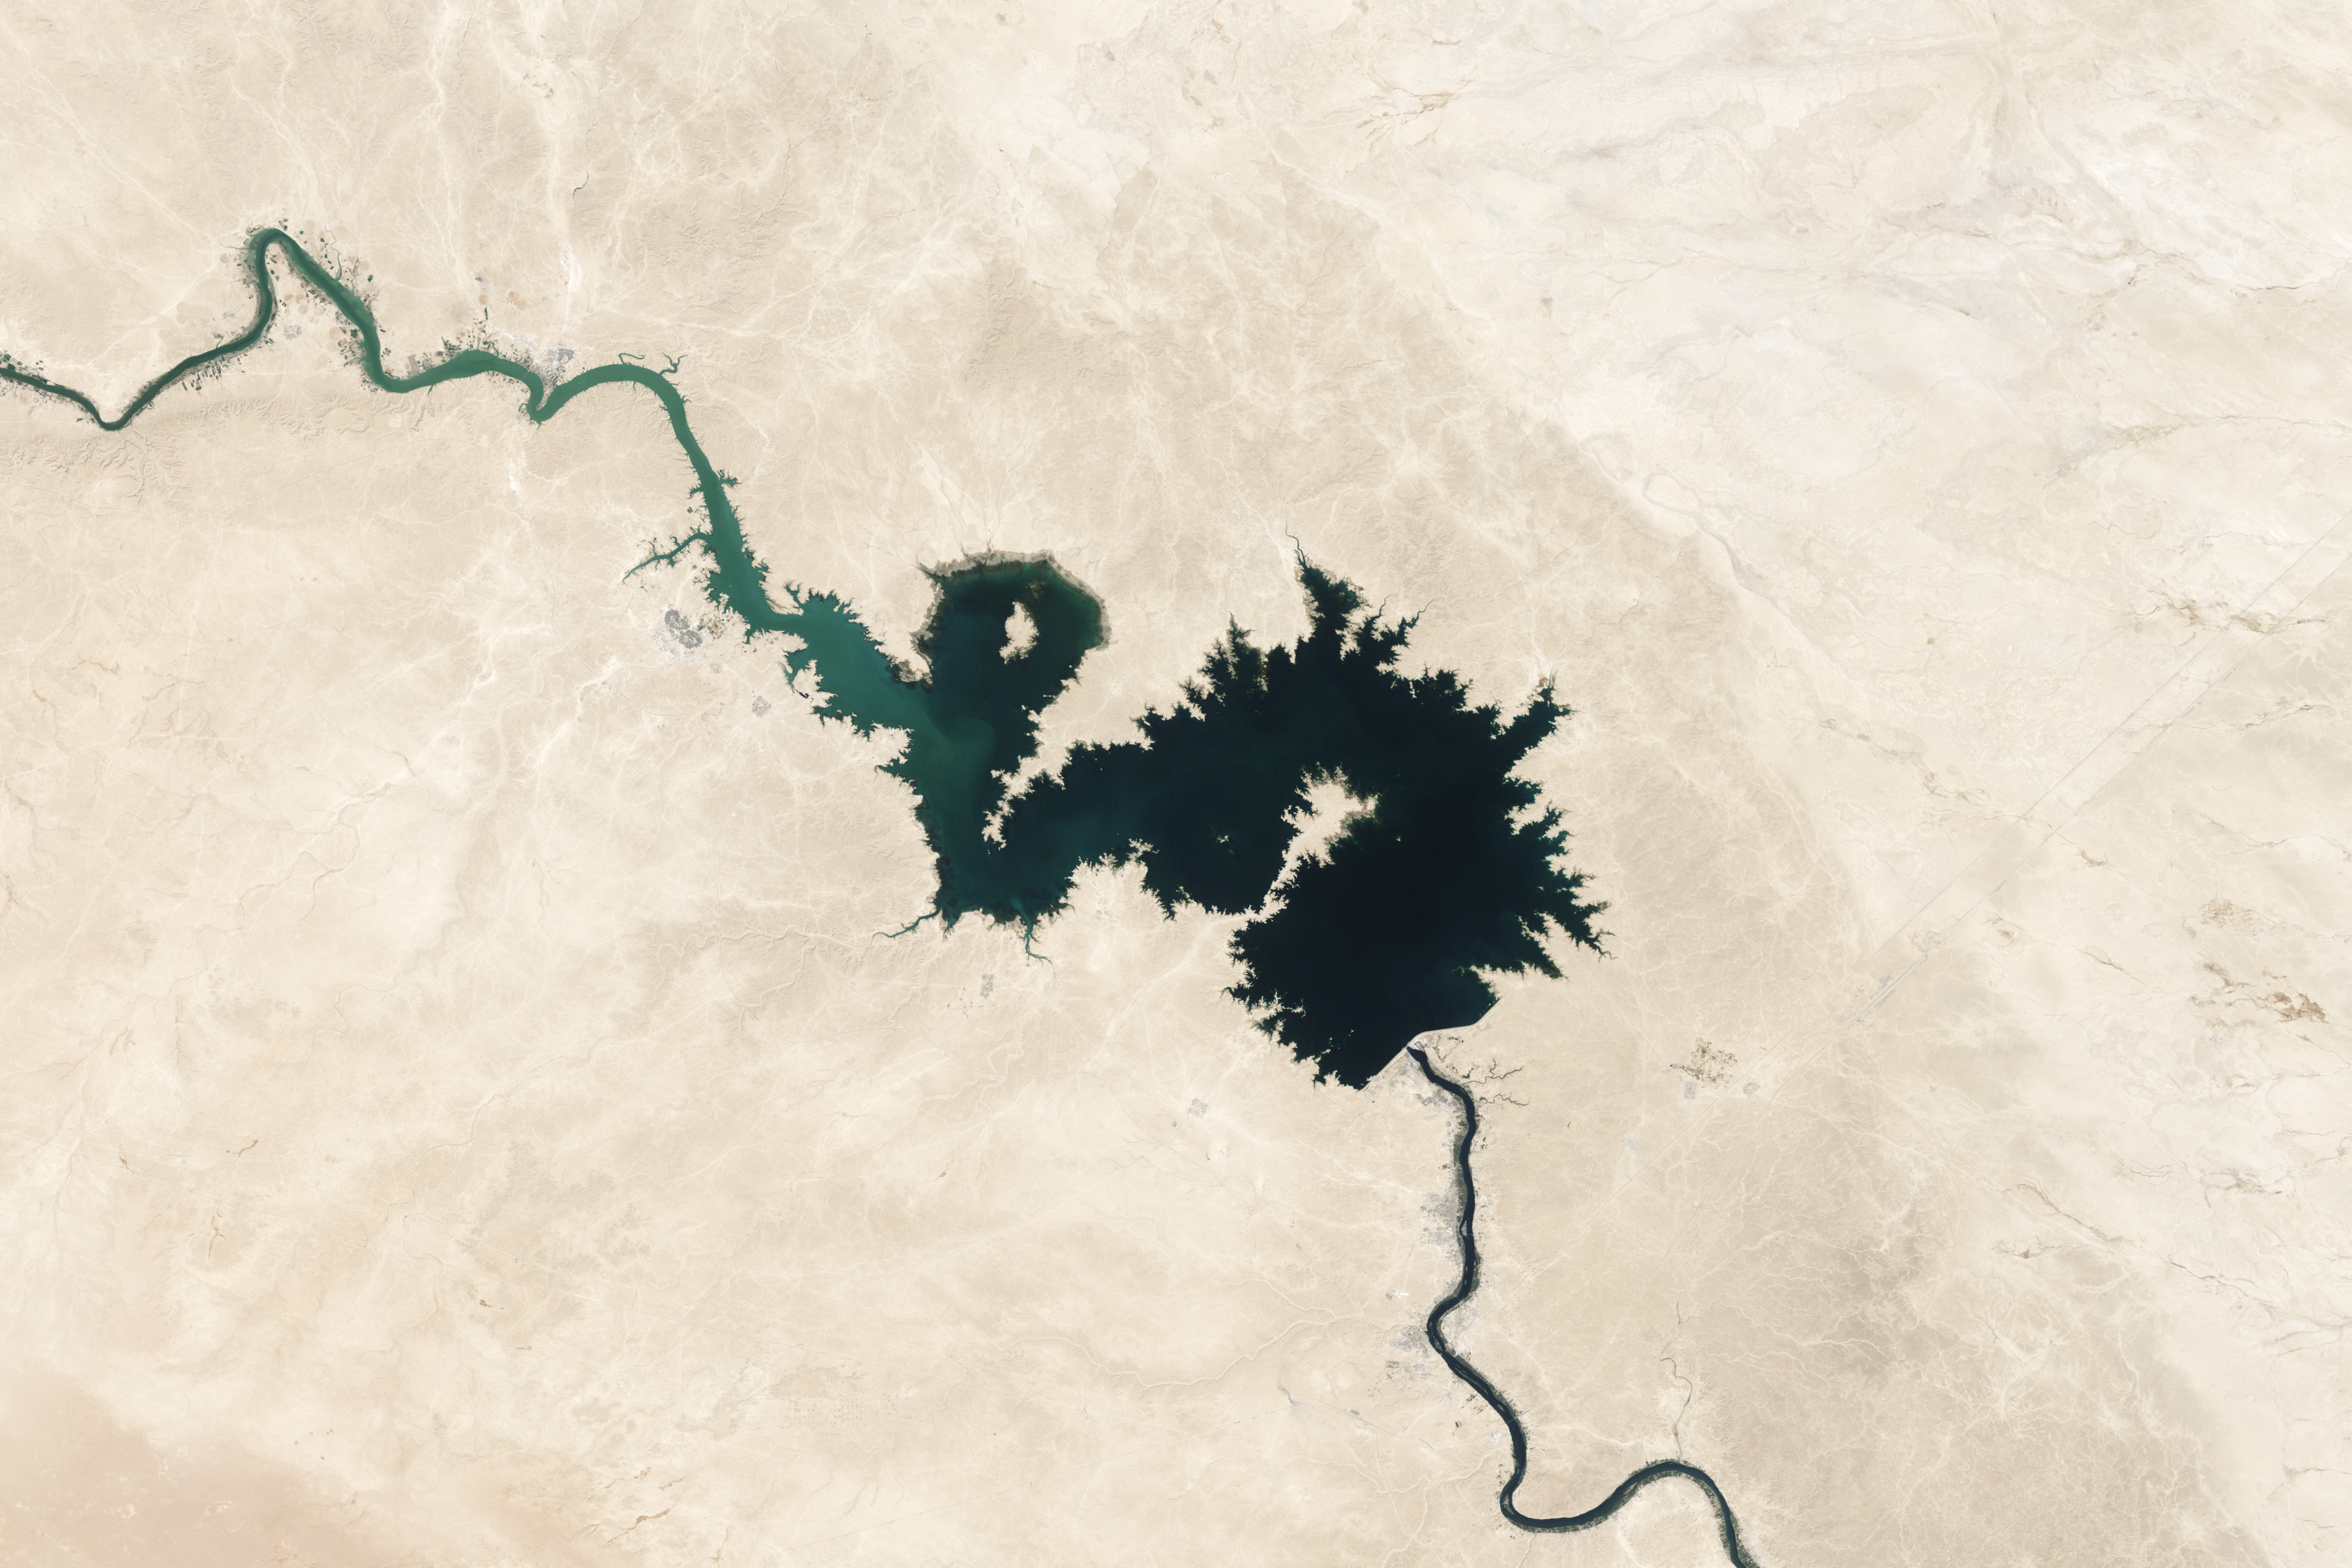 Freshwater Stores Shrank in Tigris-Euphrates Basin - related image preview